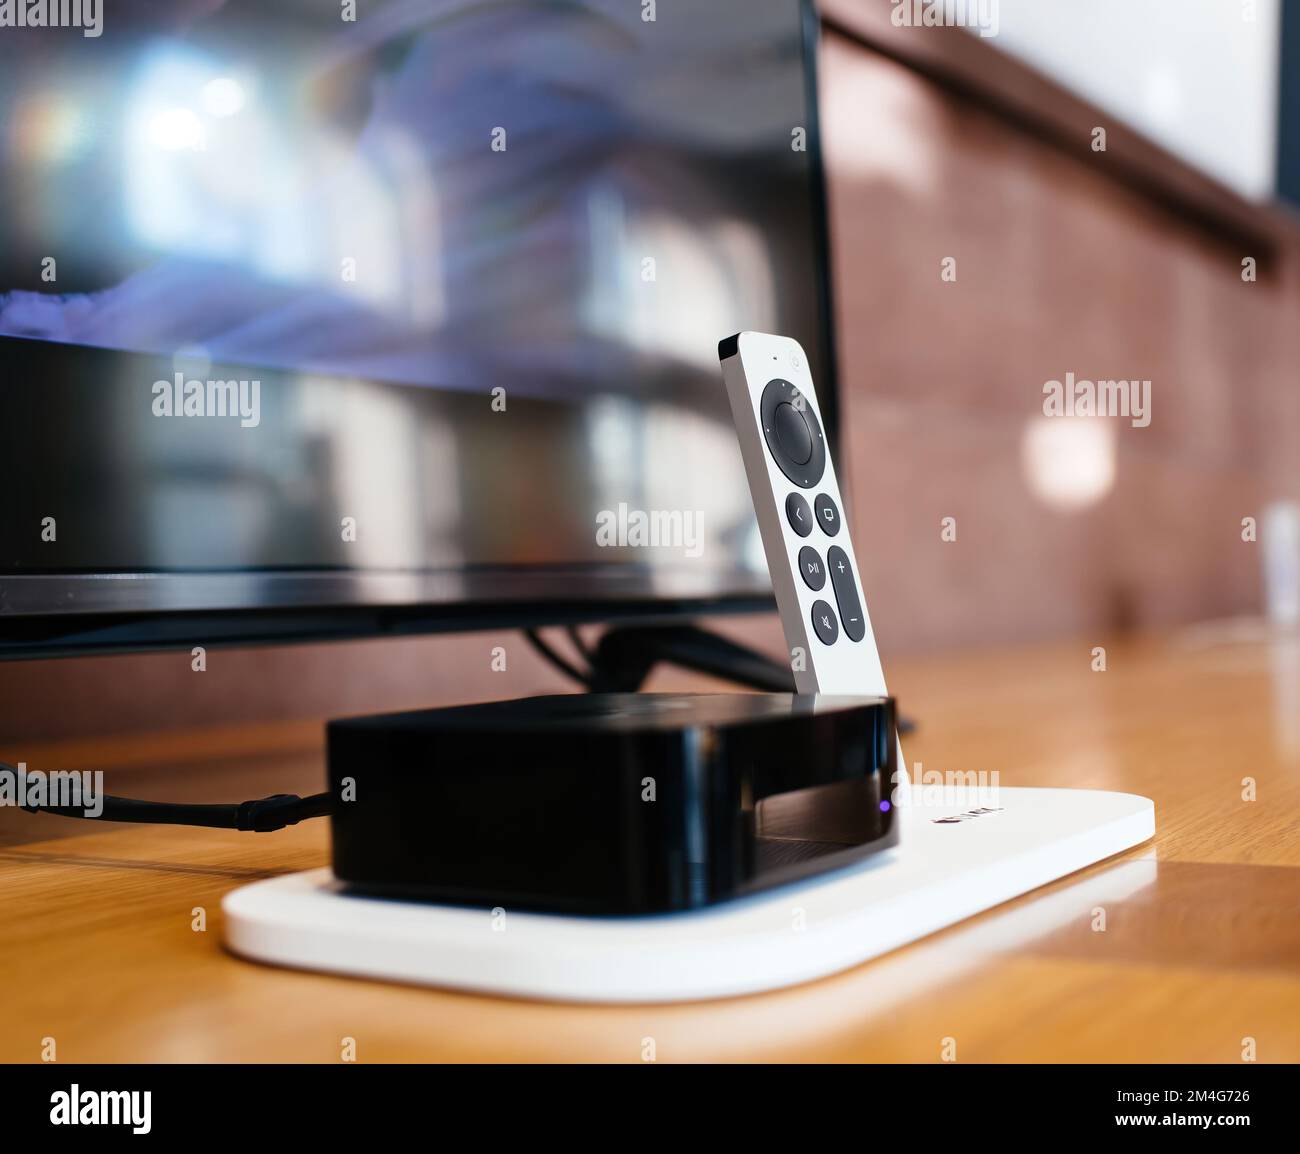 Paris, France - Oct 28, 2022: View of a latest generation Apple TV 4k and its new SIRI remote control. The Apple TV is a digital media player developed by Apple Inc Stock Photo